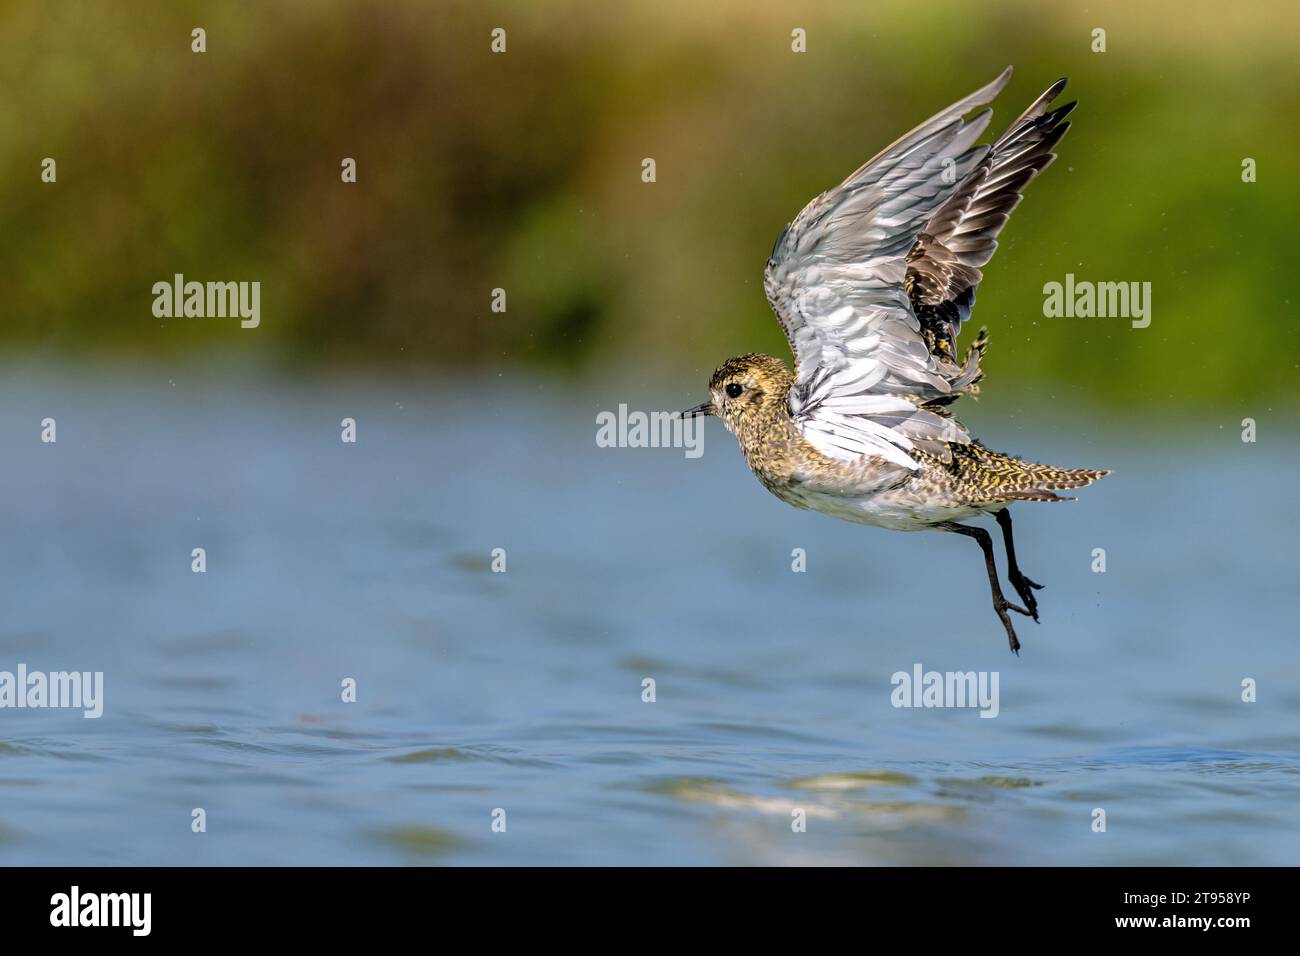 European golden plover, European golden-plover, Eurasian golden plover, golden plover (Pluvialis apricaria), flying up of the shallow water in Stock Photo